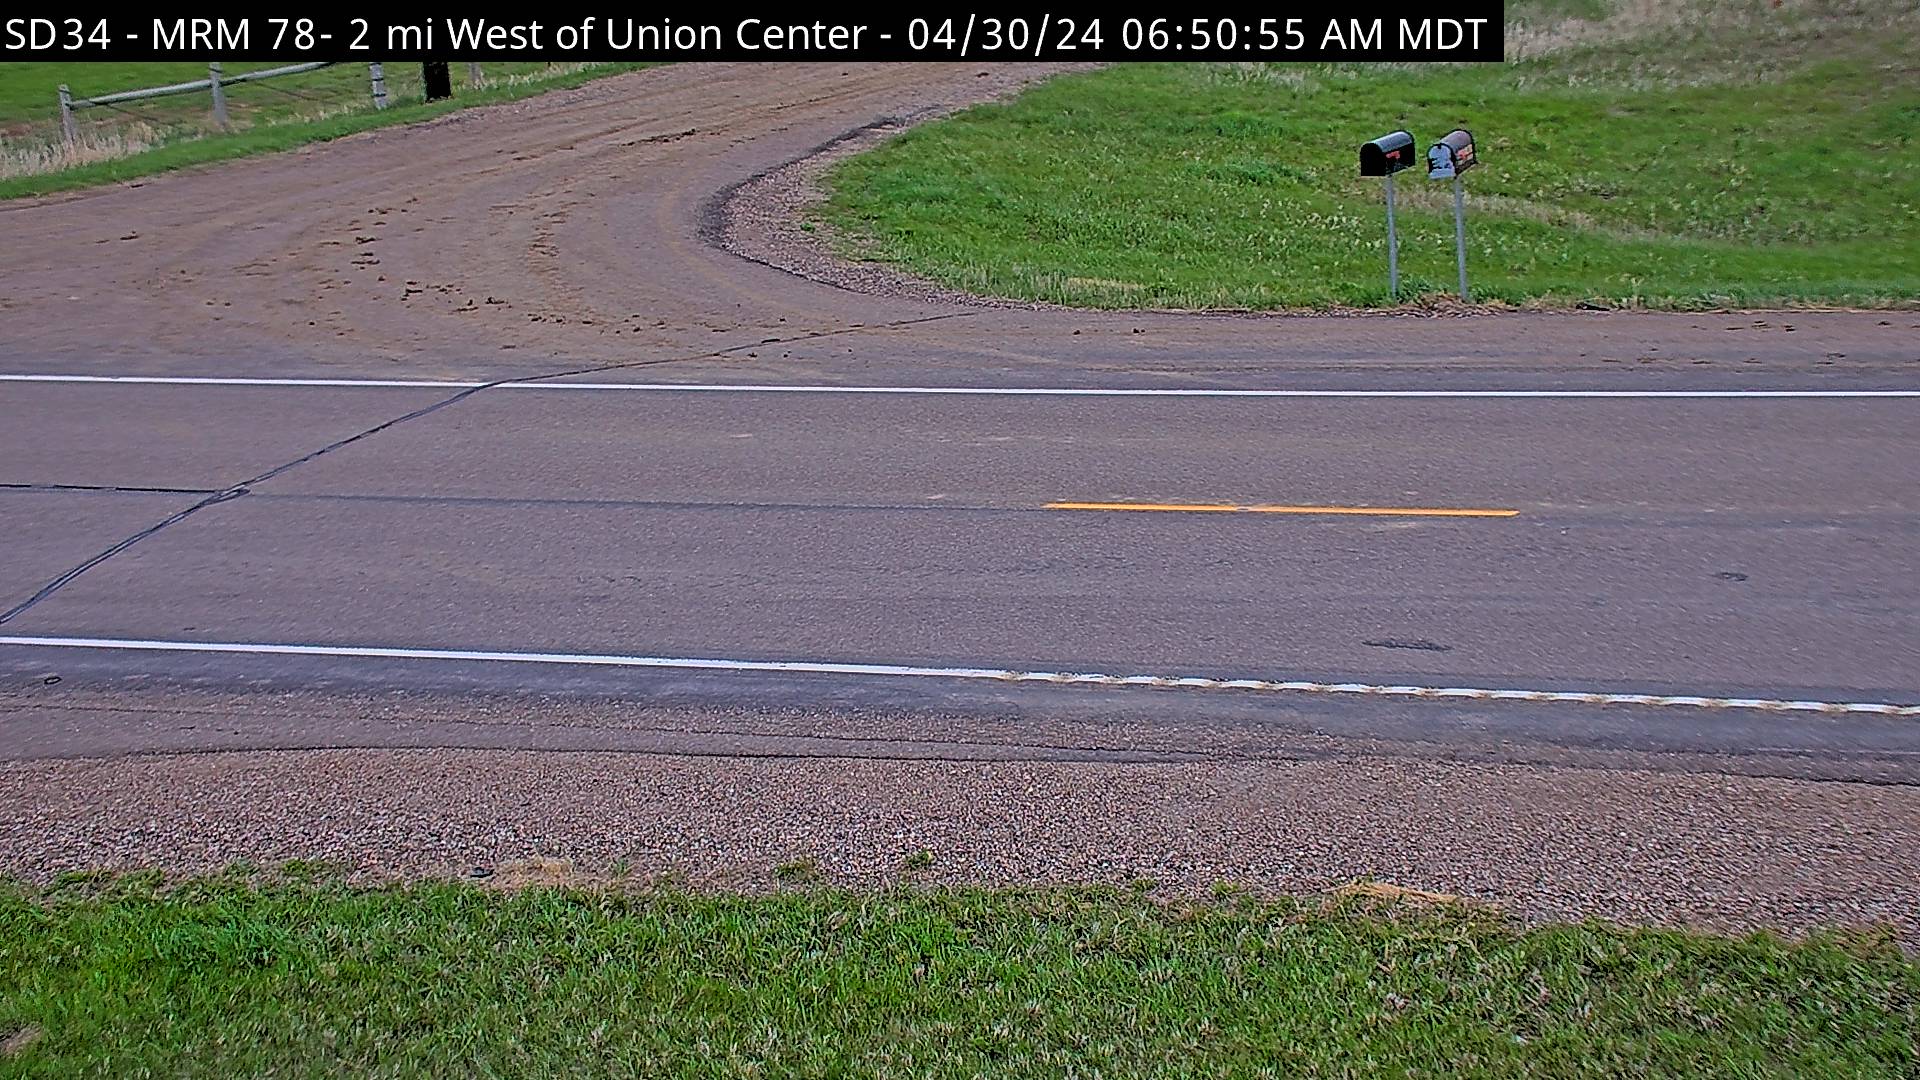 2 miles west of town along SD-34 and MP 78 - South Traffic Camera